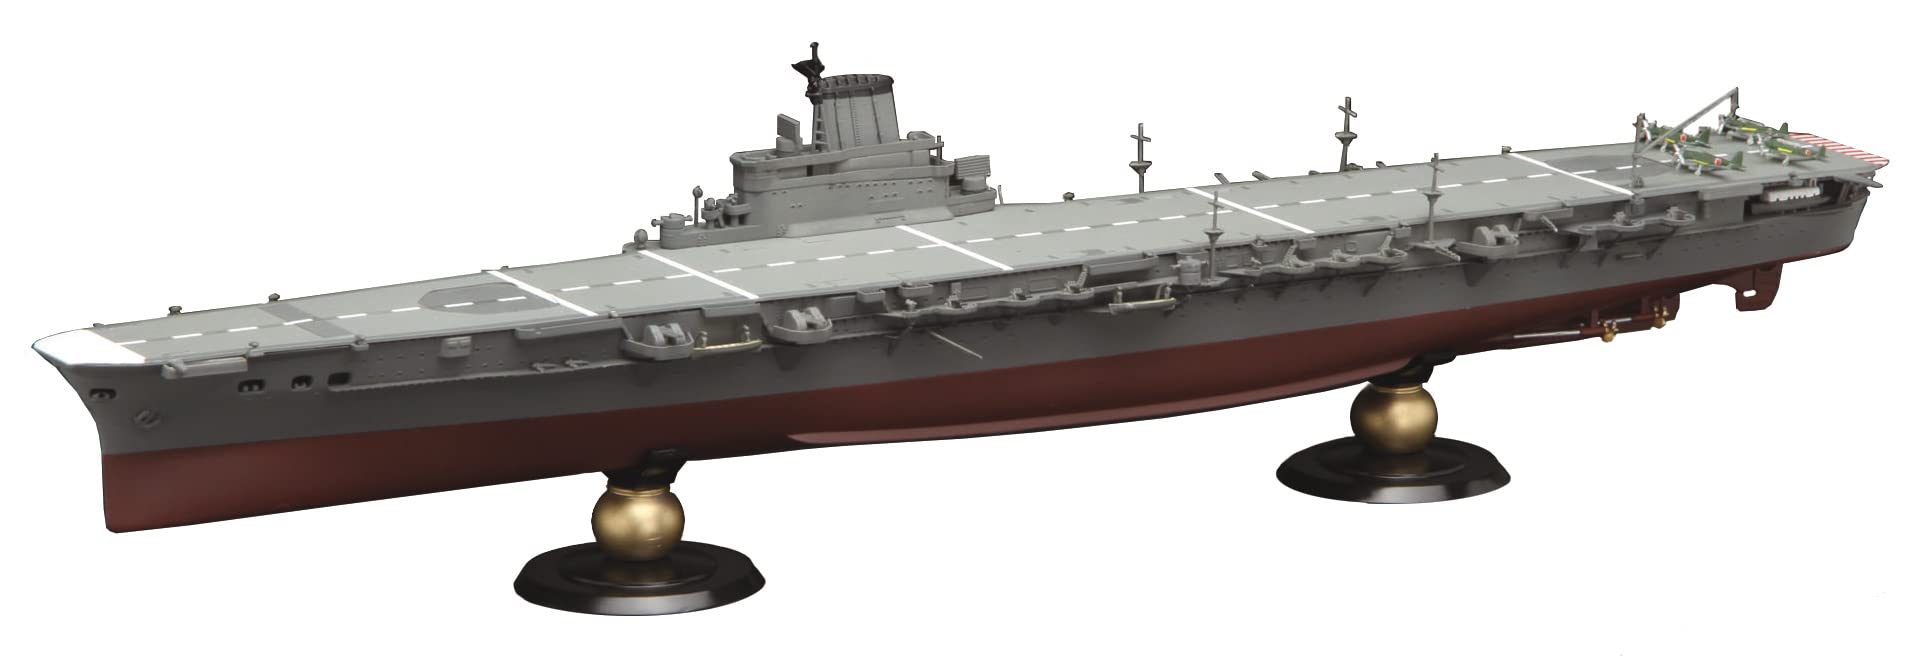 Fujimi Model 1/700 Imperial Navy Series No.18 Japanese Navy Aircraft Carrier Taiho (Latex Deck) Full Hull Model Fh18